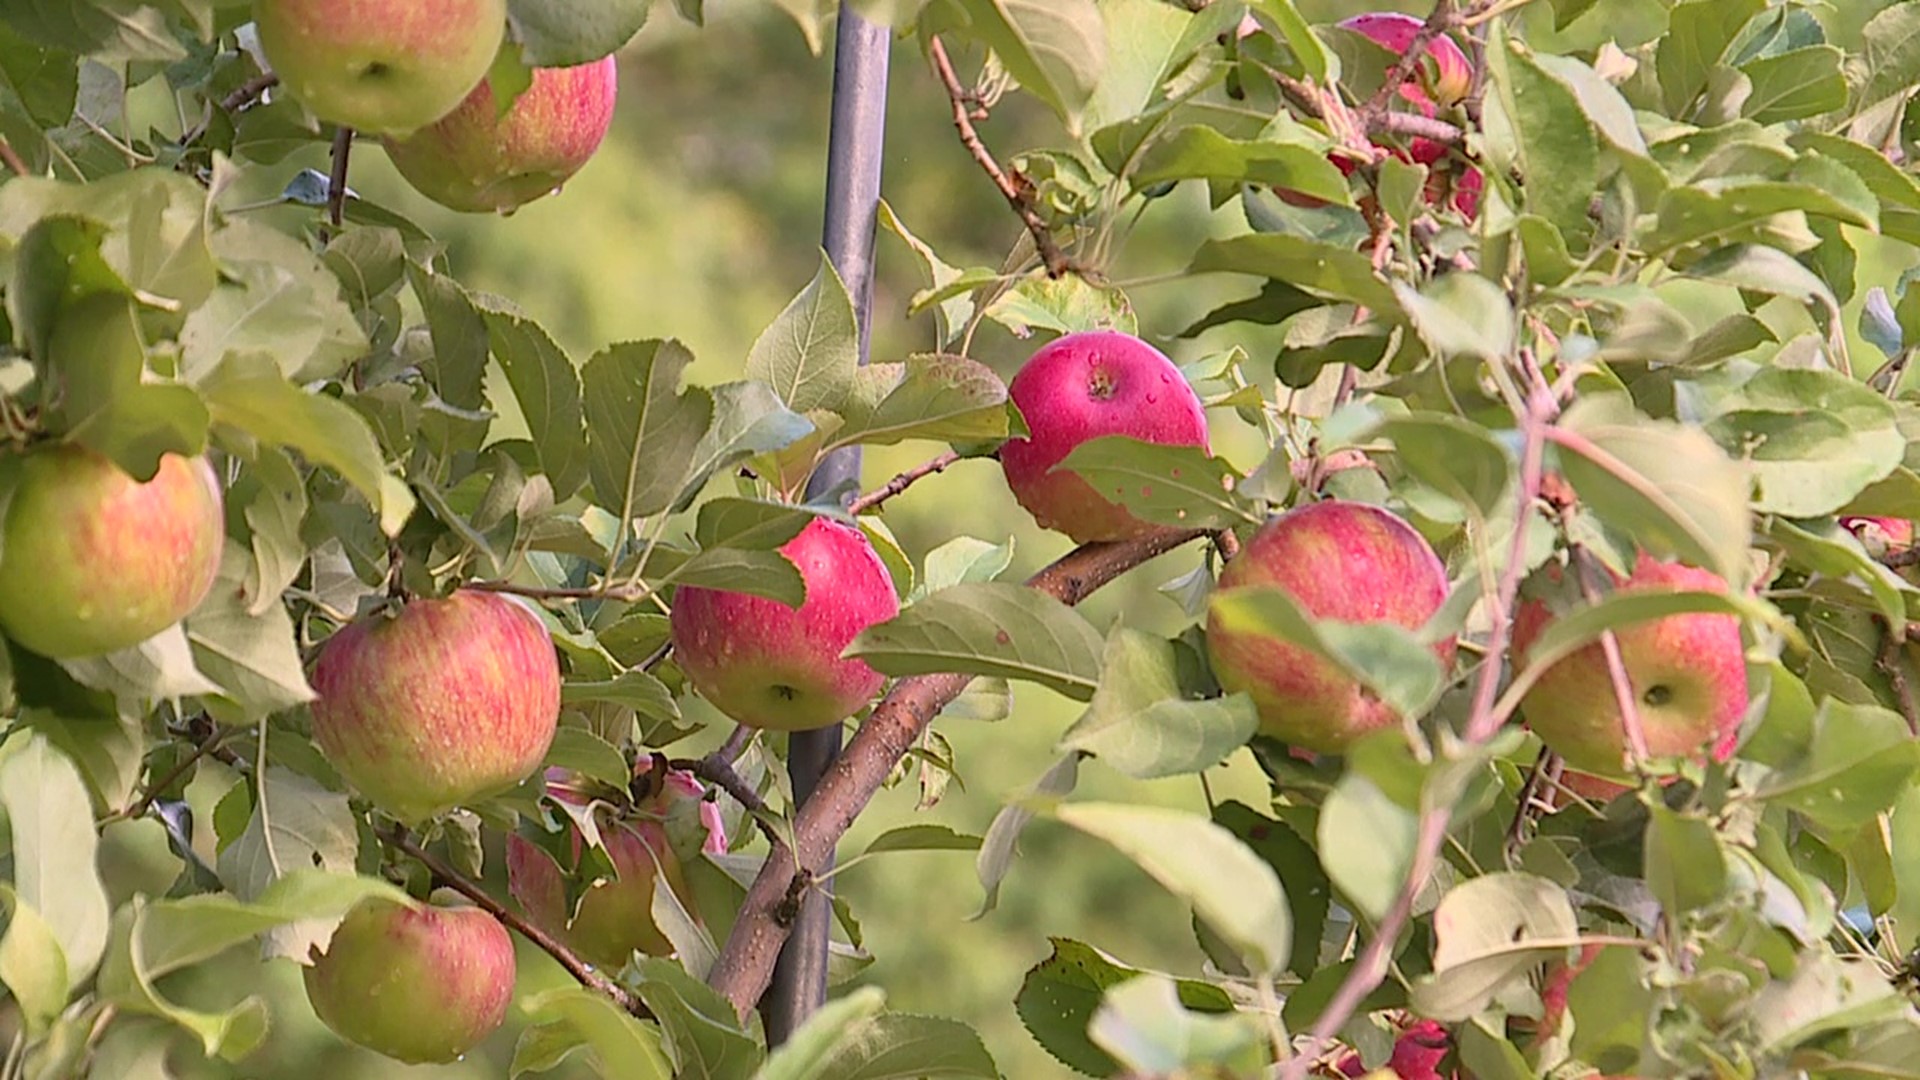 The recent rainfall in central Pennsylvania has given an area apple orchard a big boost lately.